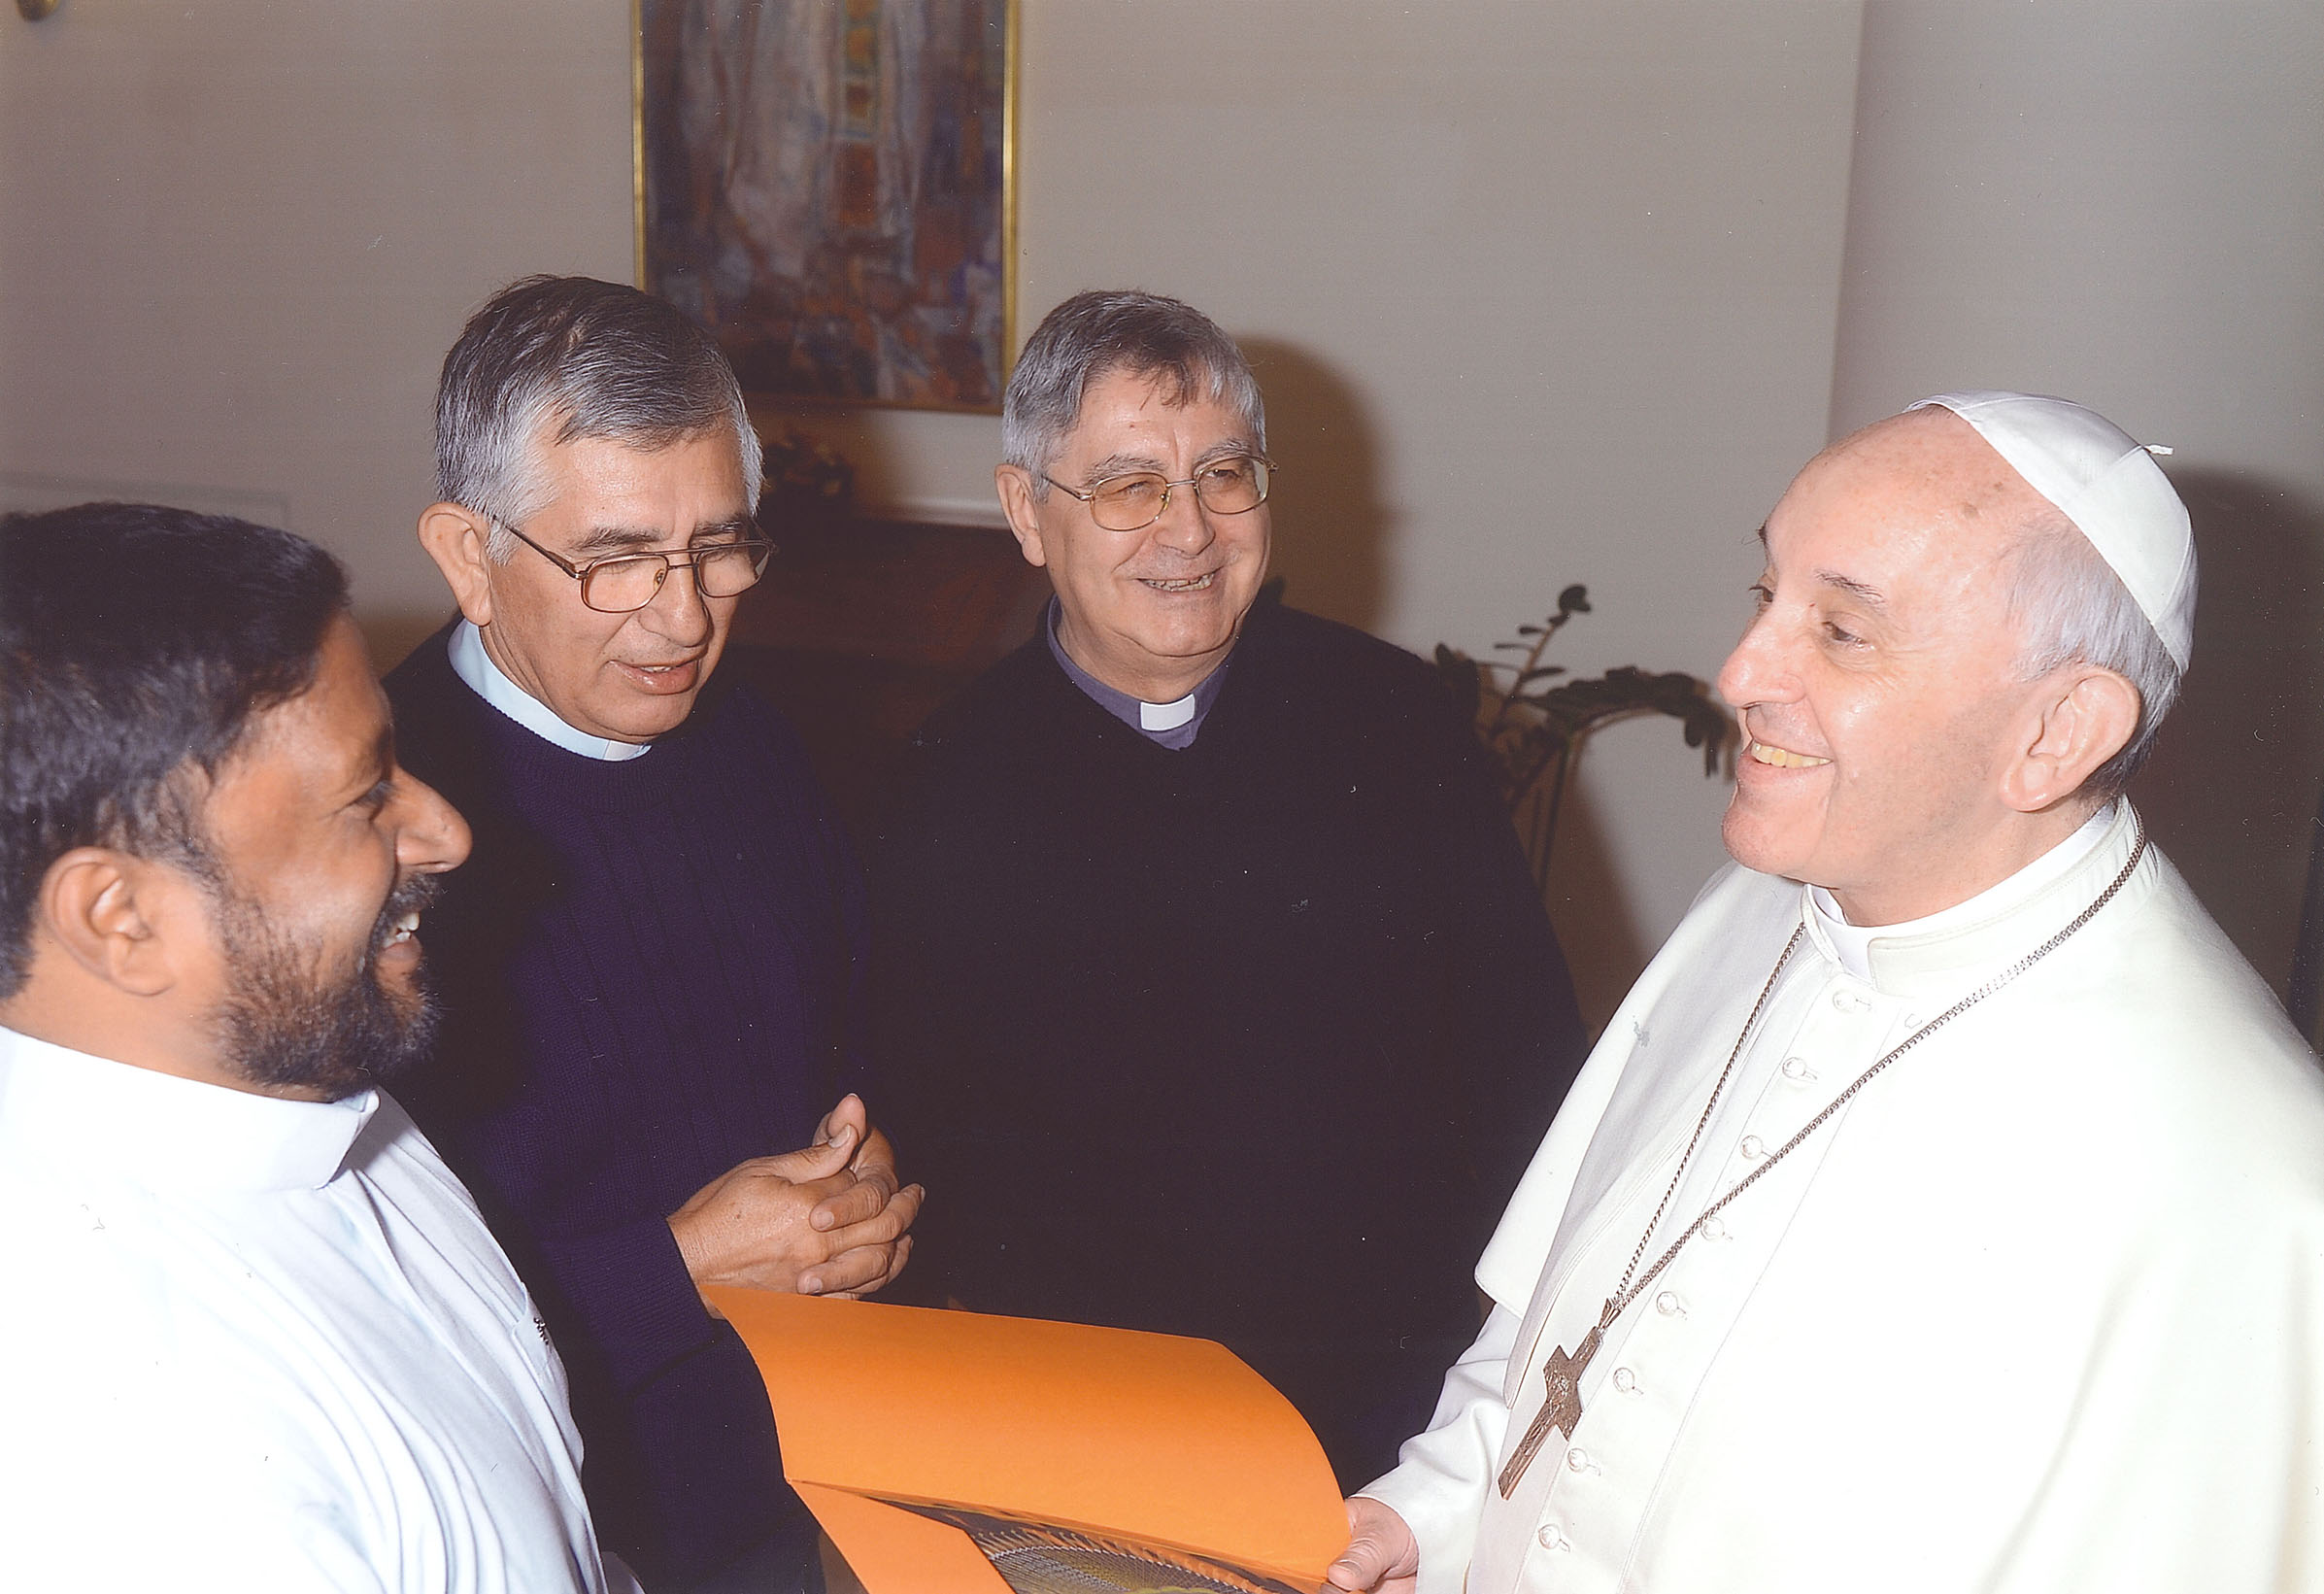 Three Betharramite “continents” heartfully welcomed by Pope Francis on January 21st 2014 